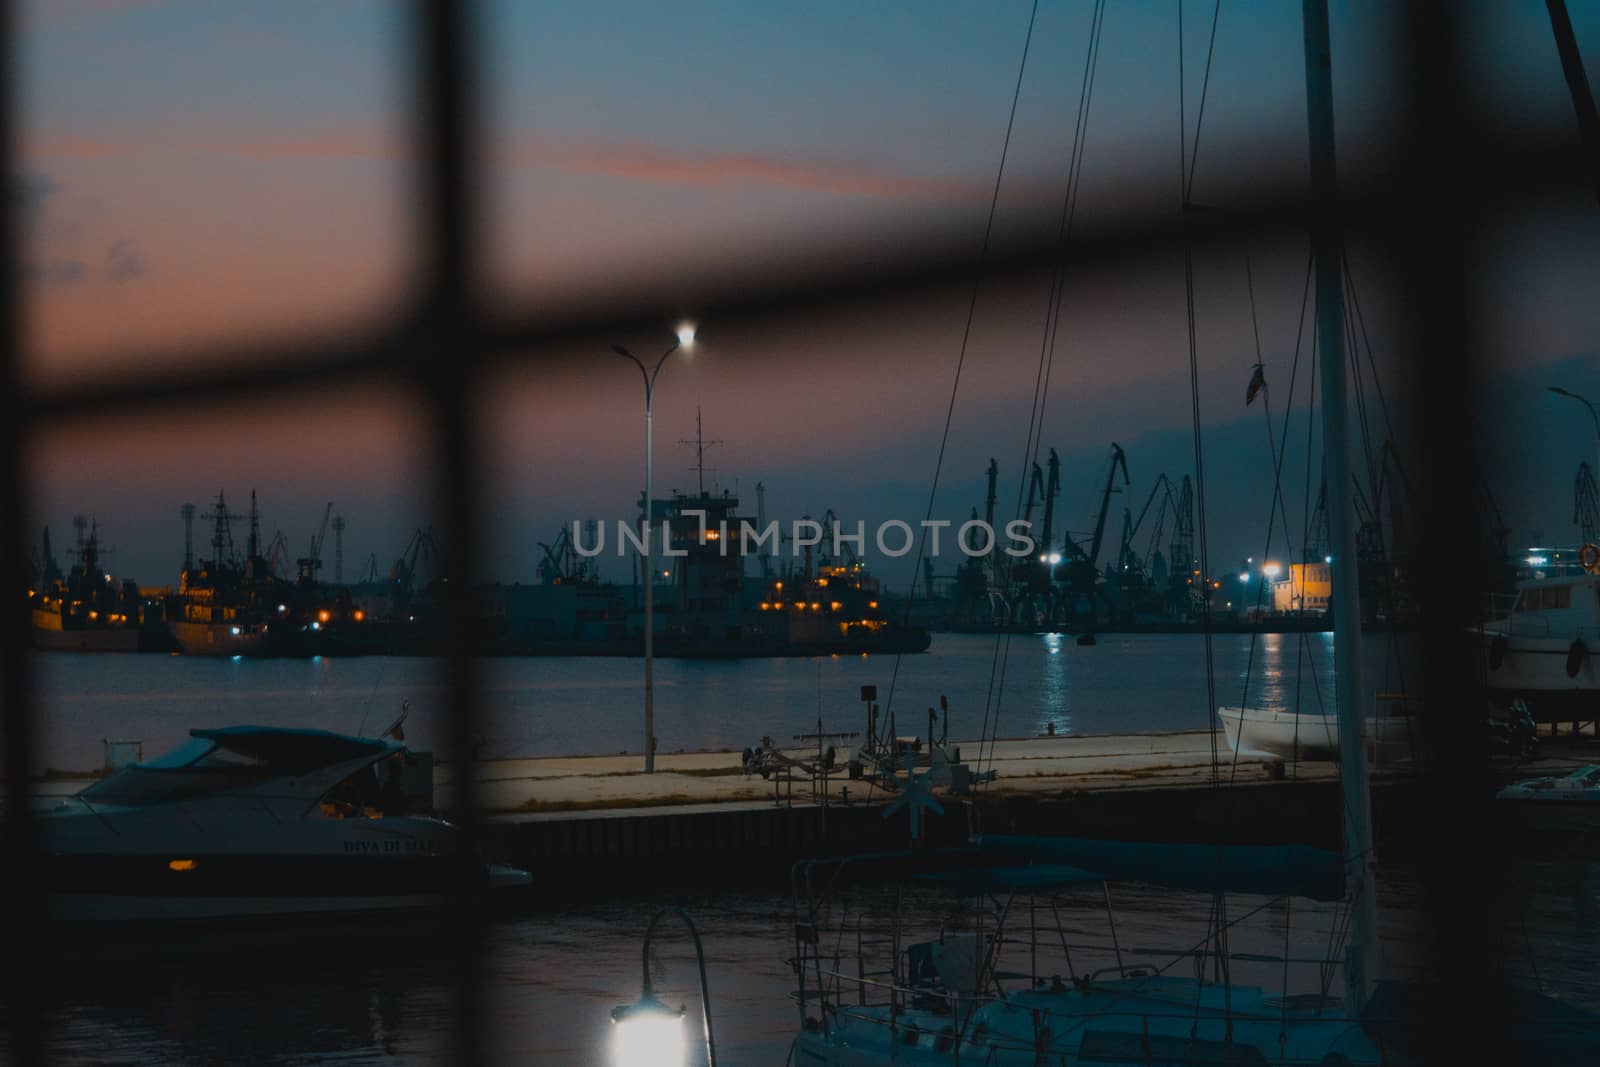 Stunning night view through a metal fence with a yacht and some ships for background. by justbrotography